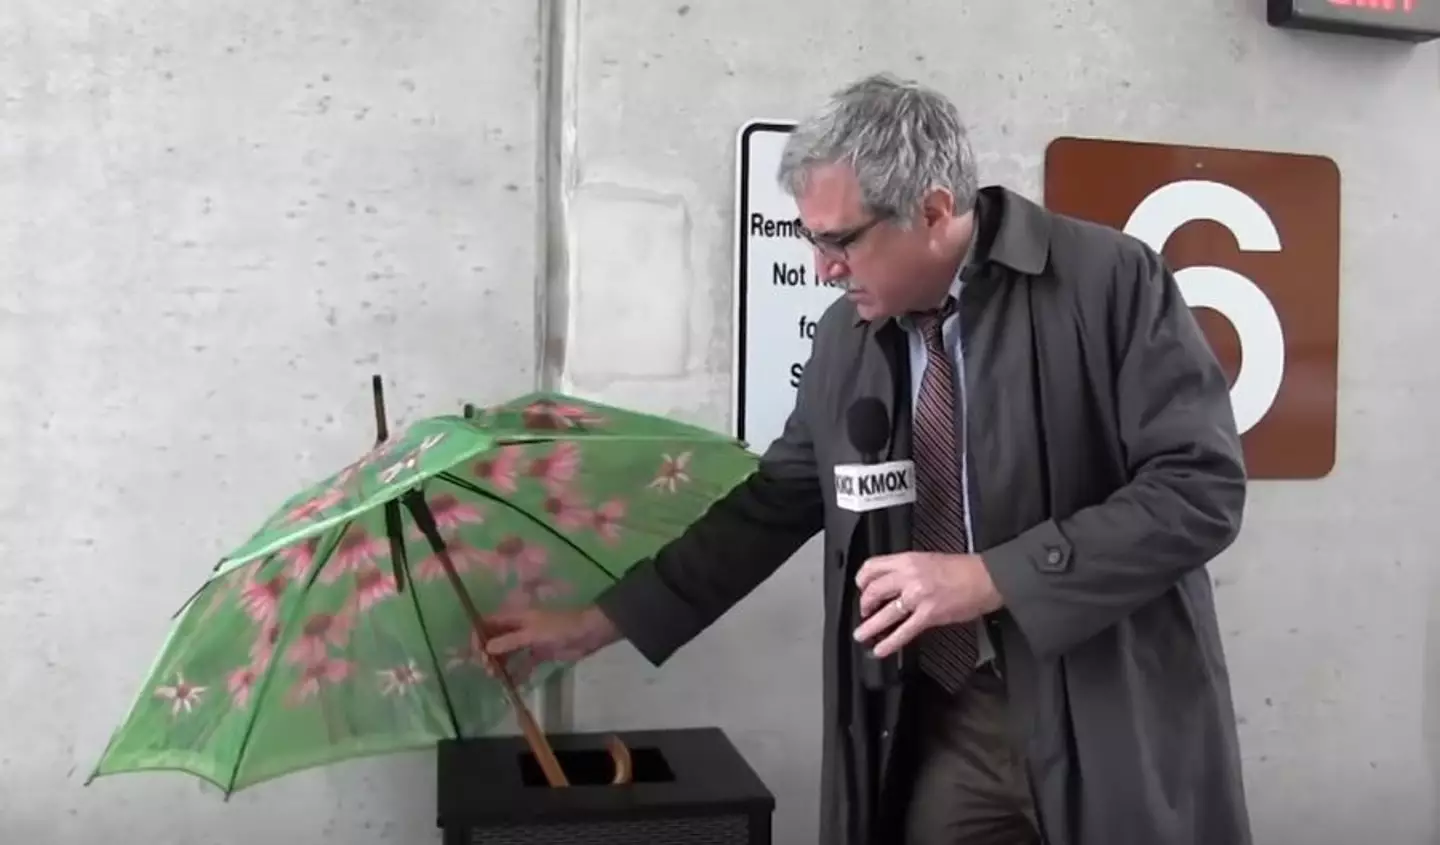 Kevin Killeen finds umbrella which symbolises February. (KMOX)